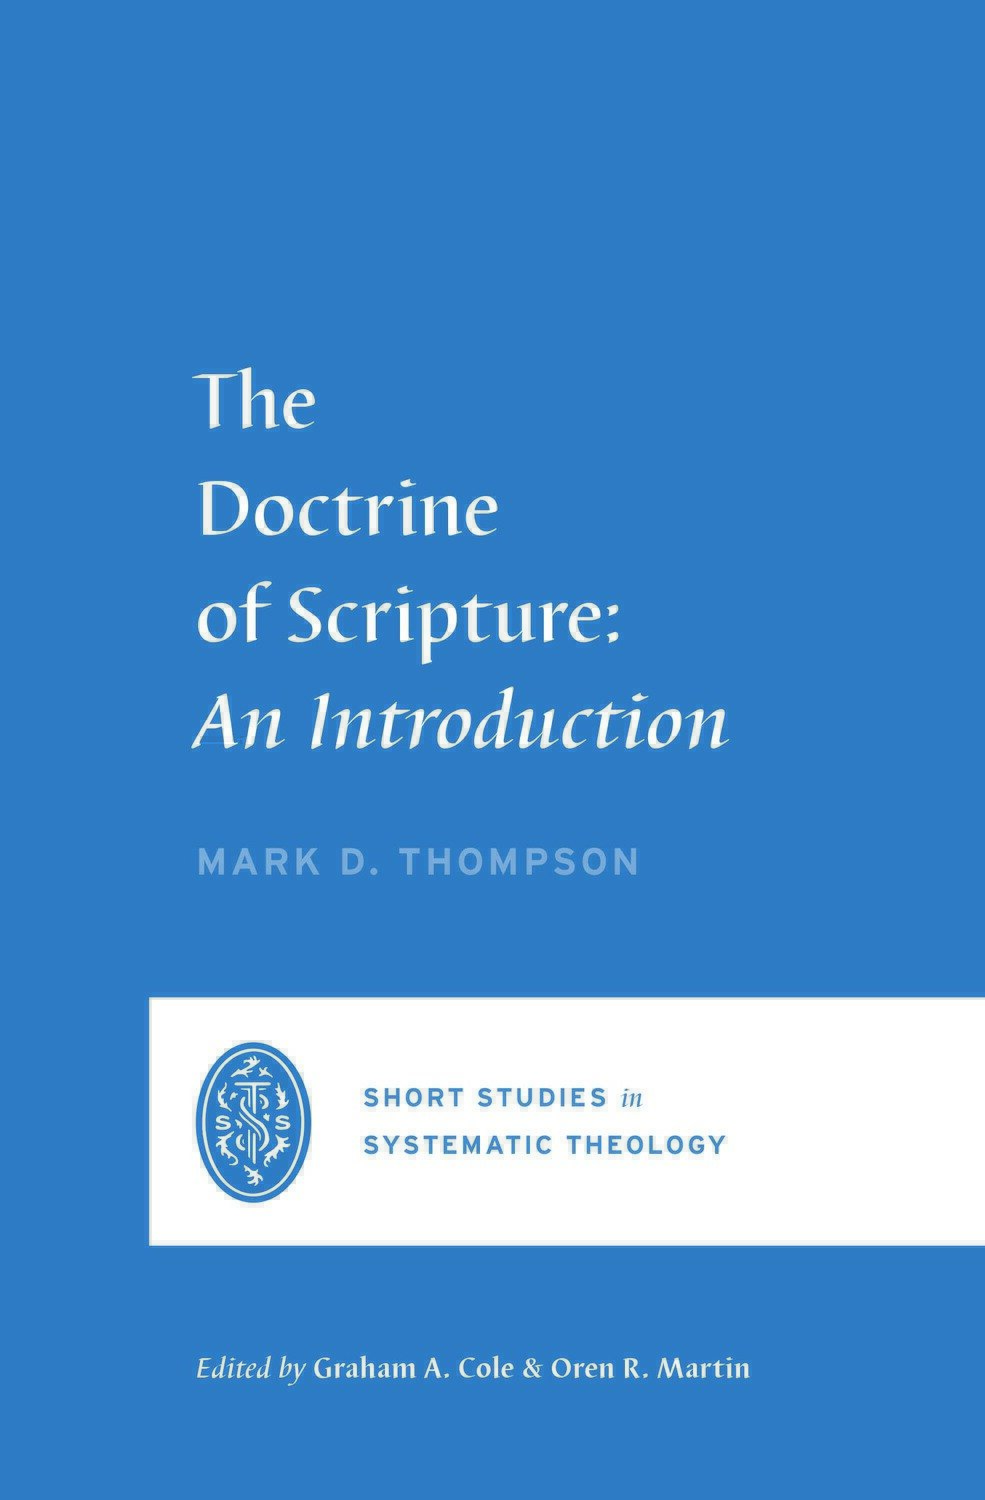 The Doctrine of Scripture: An Introduction (Short Studies in Systematic Theology)